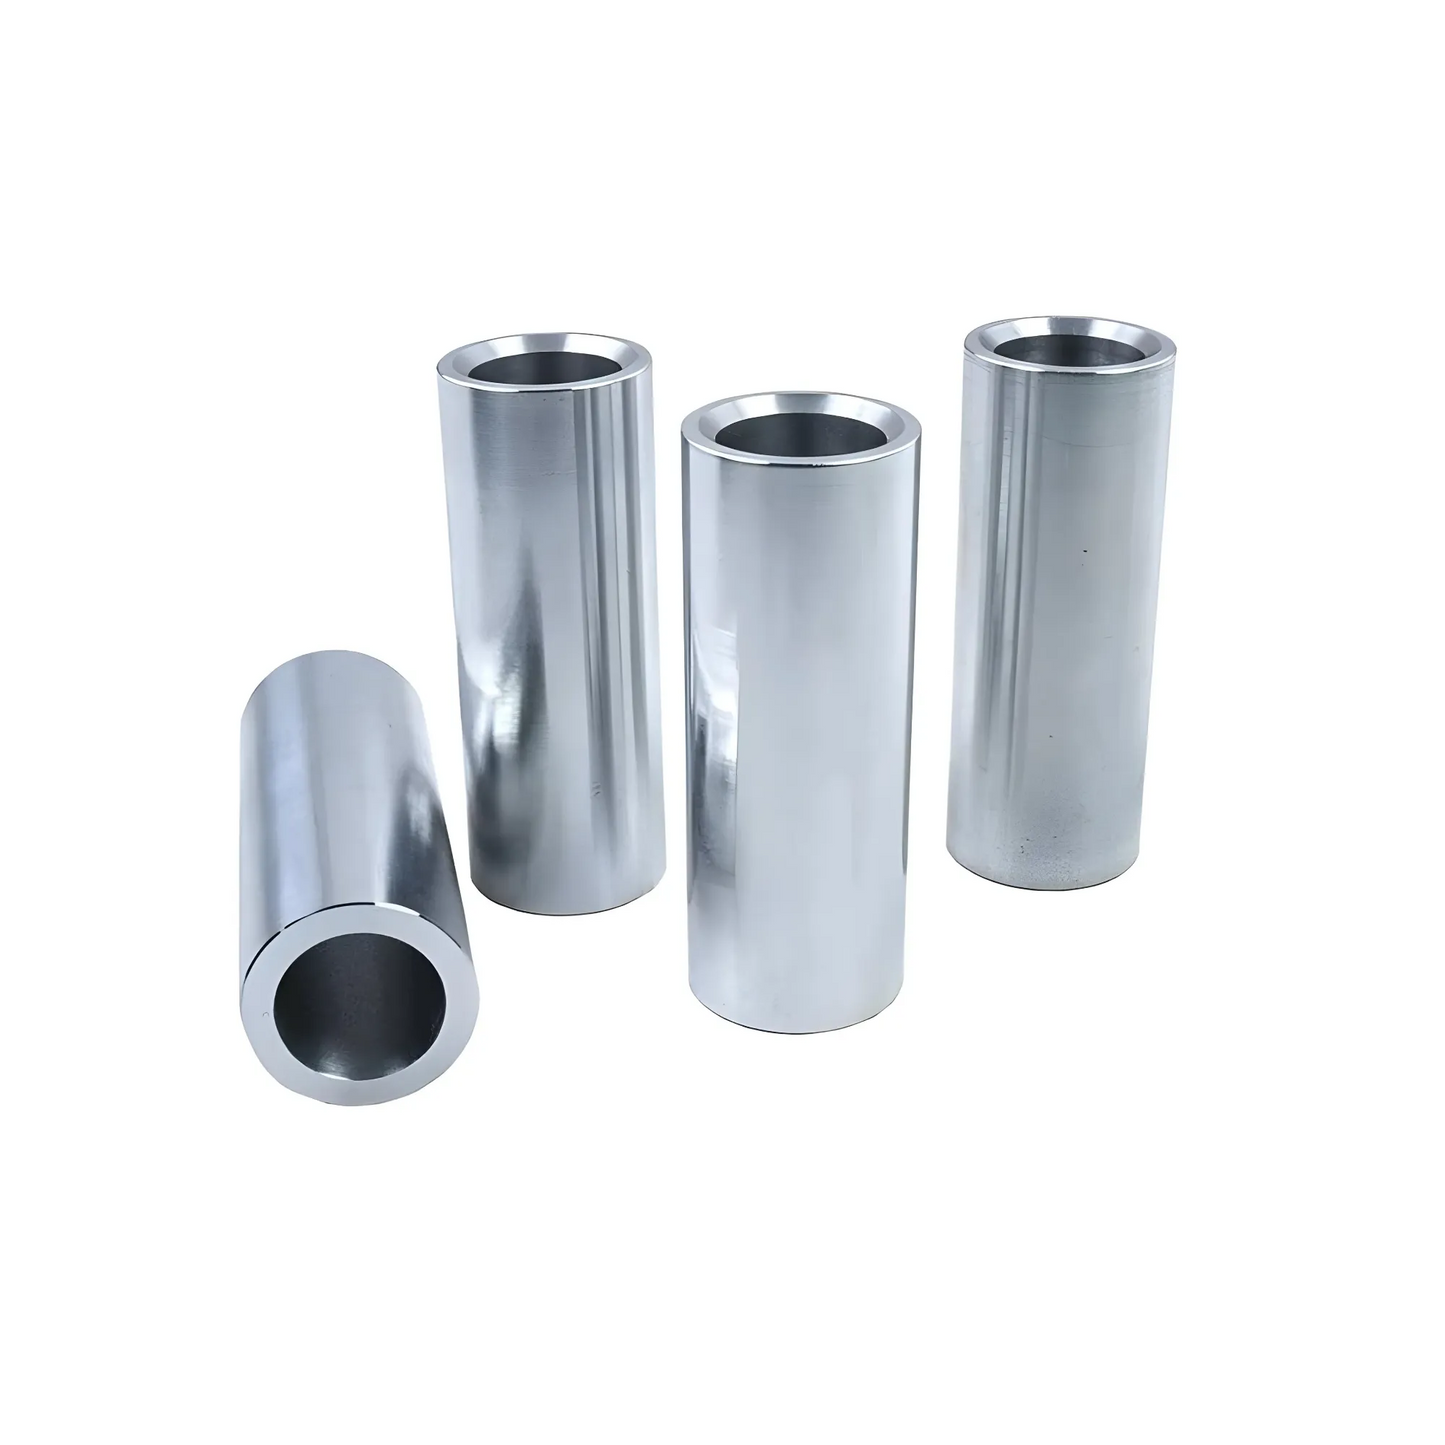 Fuel Injector Bung - 4 Pack